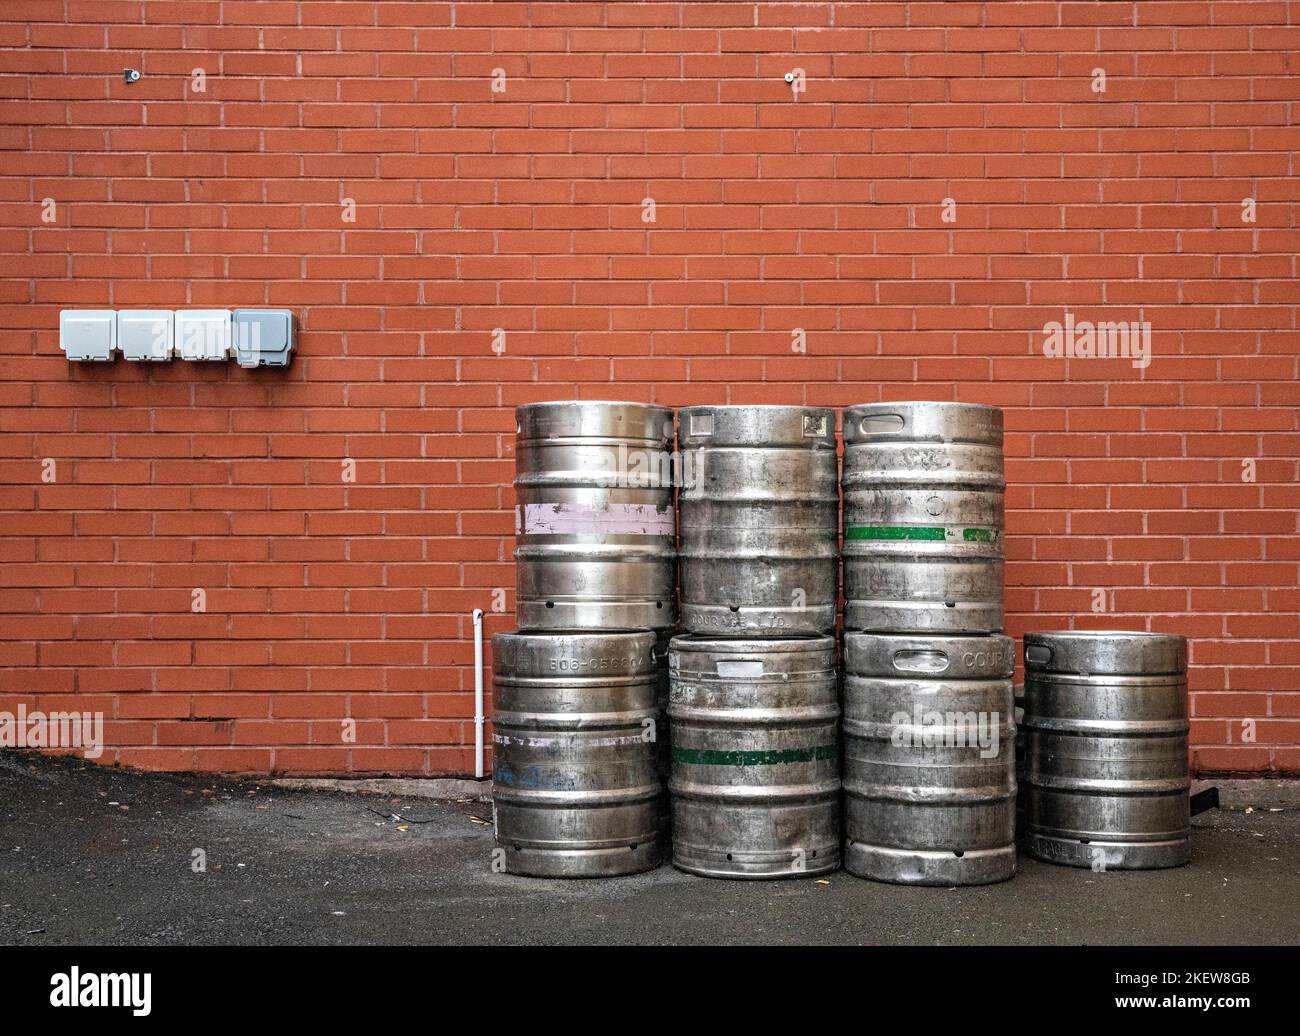 Barrels stacked against red brick wall Stock Photo